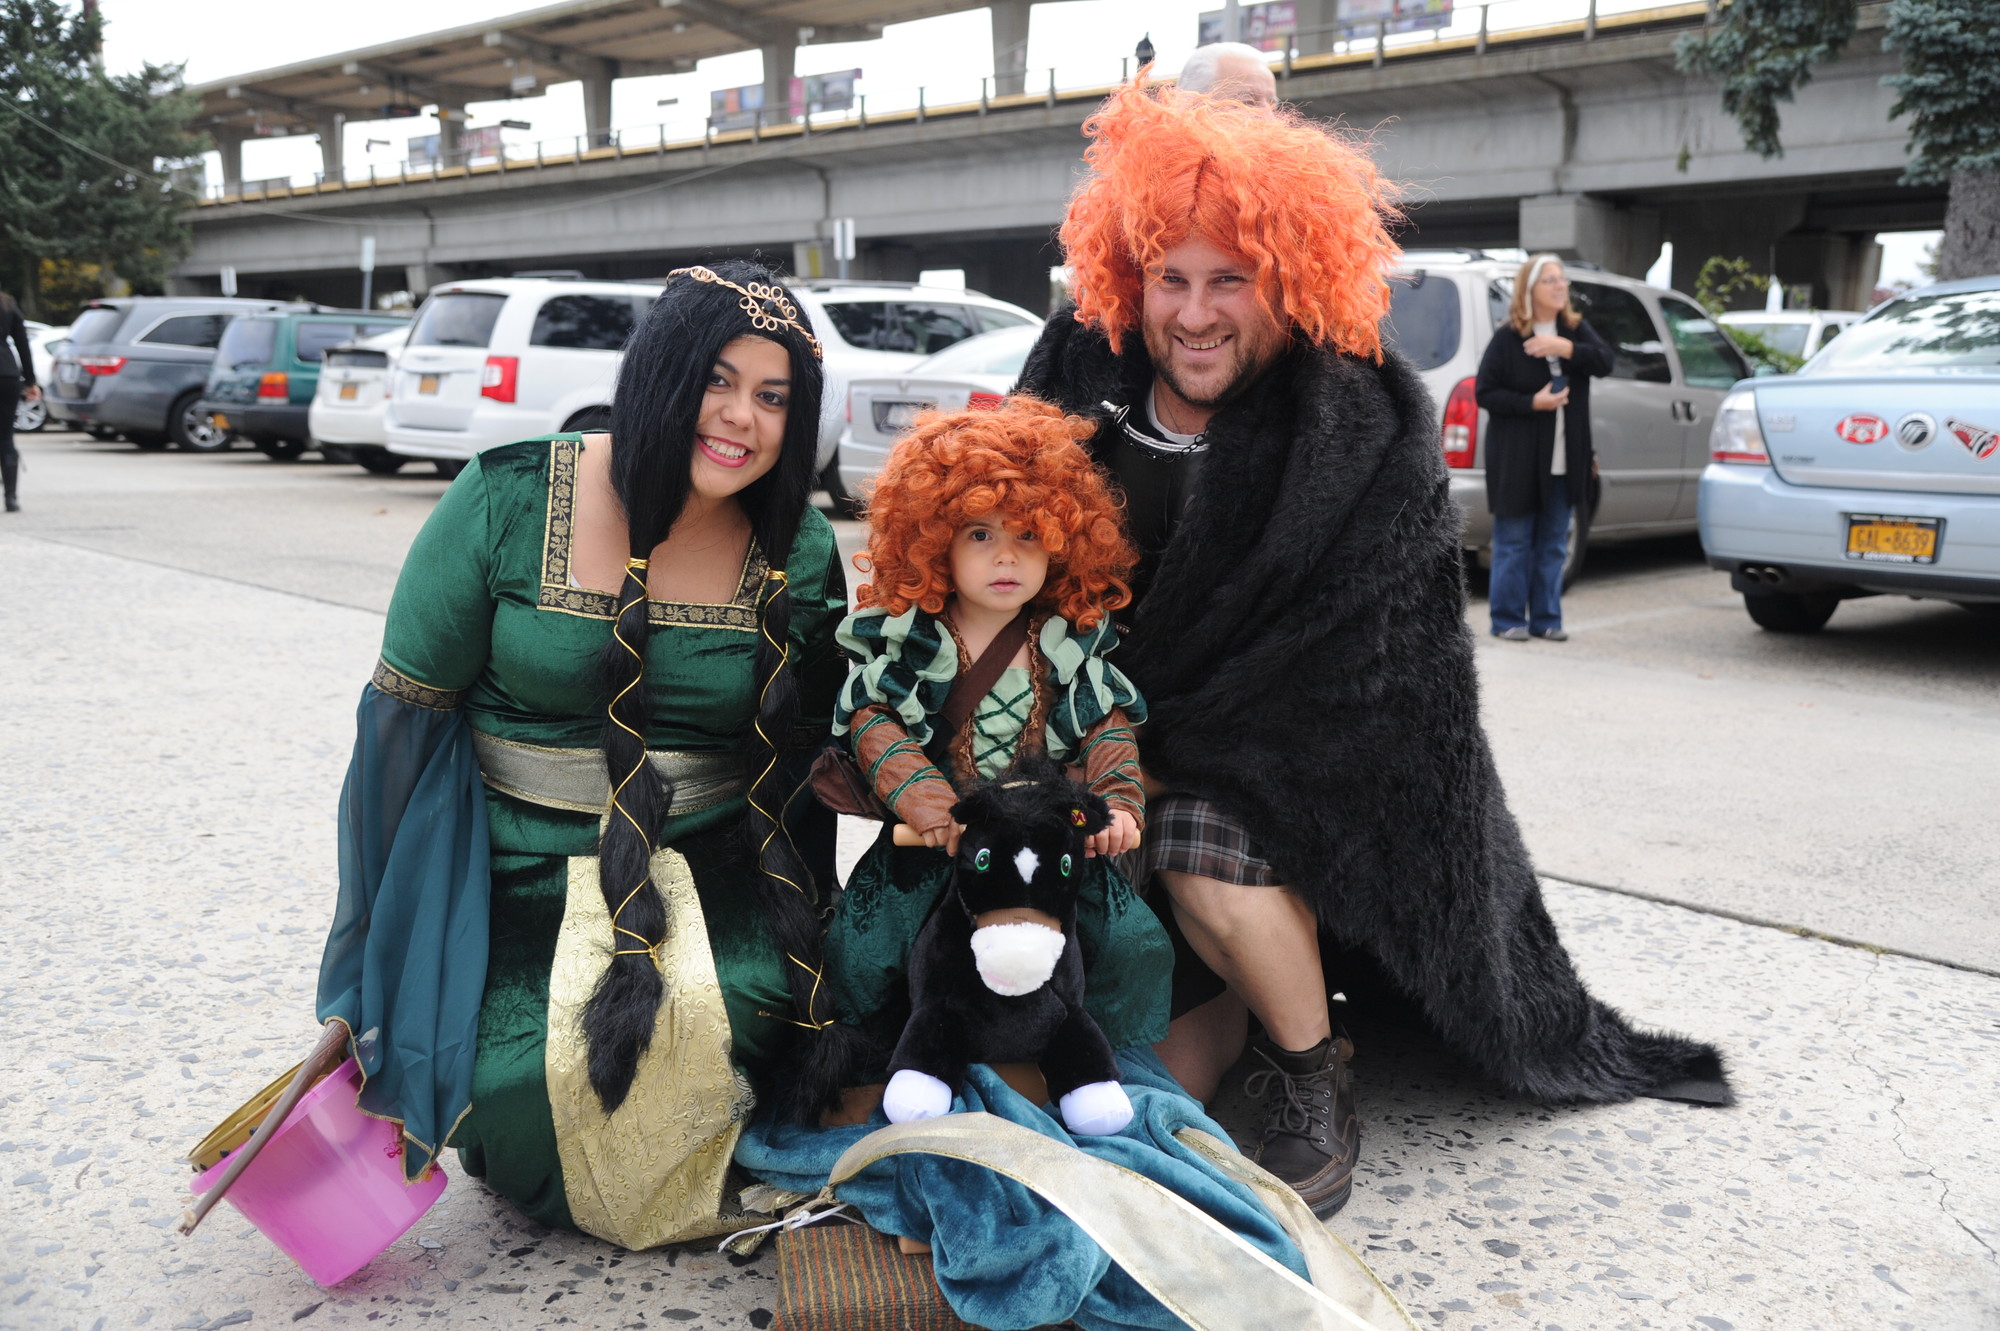 The Weiss family based their costumes on the Disney film “Brave.” Kemely dressed as Queen Eleanor, while Philip was King Furgus and young Leyla was Merida.